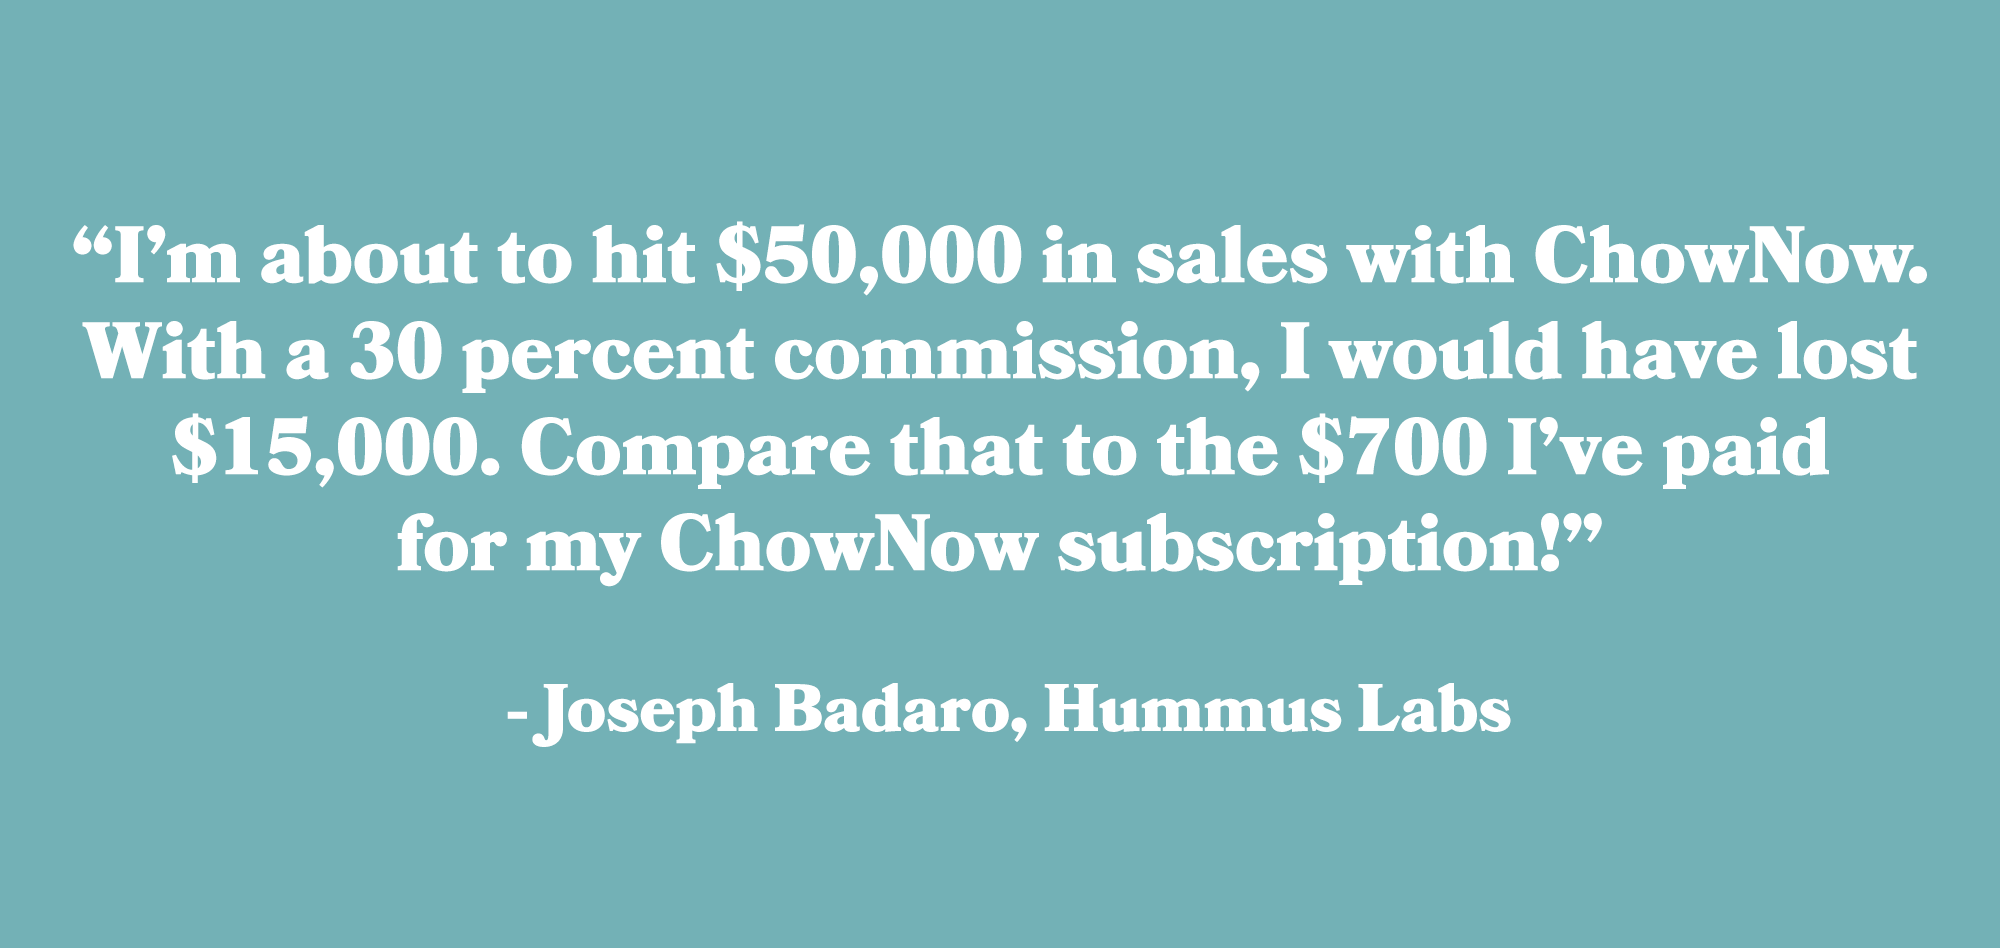 “I’m about to hit $50,000 in sales with ChowNow. With a 30 percent commission, I would have lost $15,000. Compare that to the $700 I’ve paid for my ChowNow subscription!” - Joseph Badaro, Hummus Labs